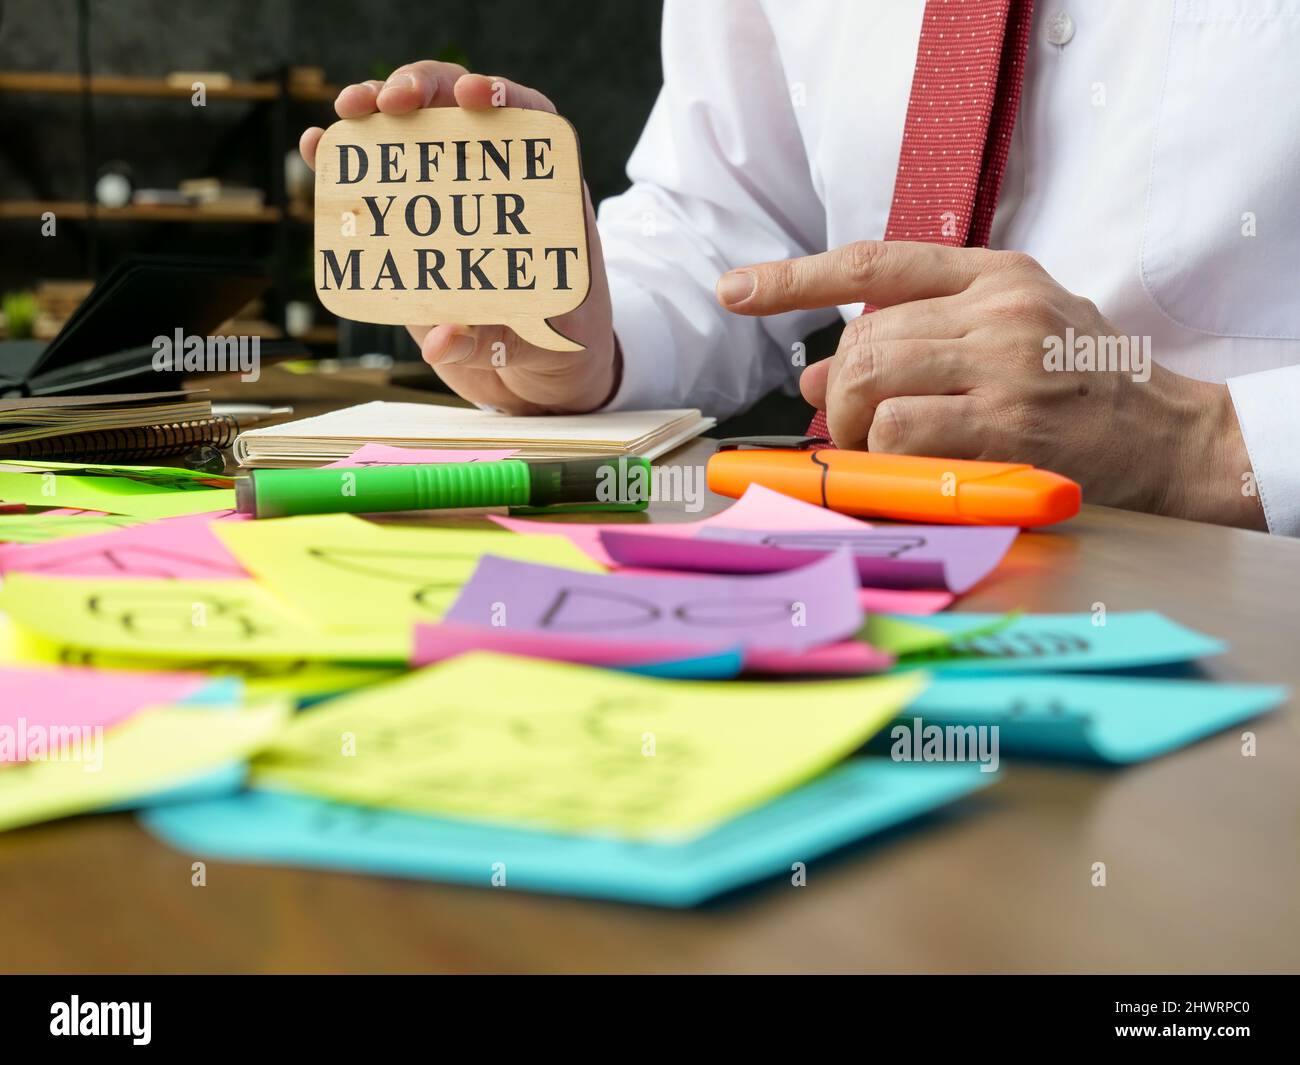 The manager points to the sign with define your market words. Stock Photo